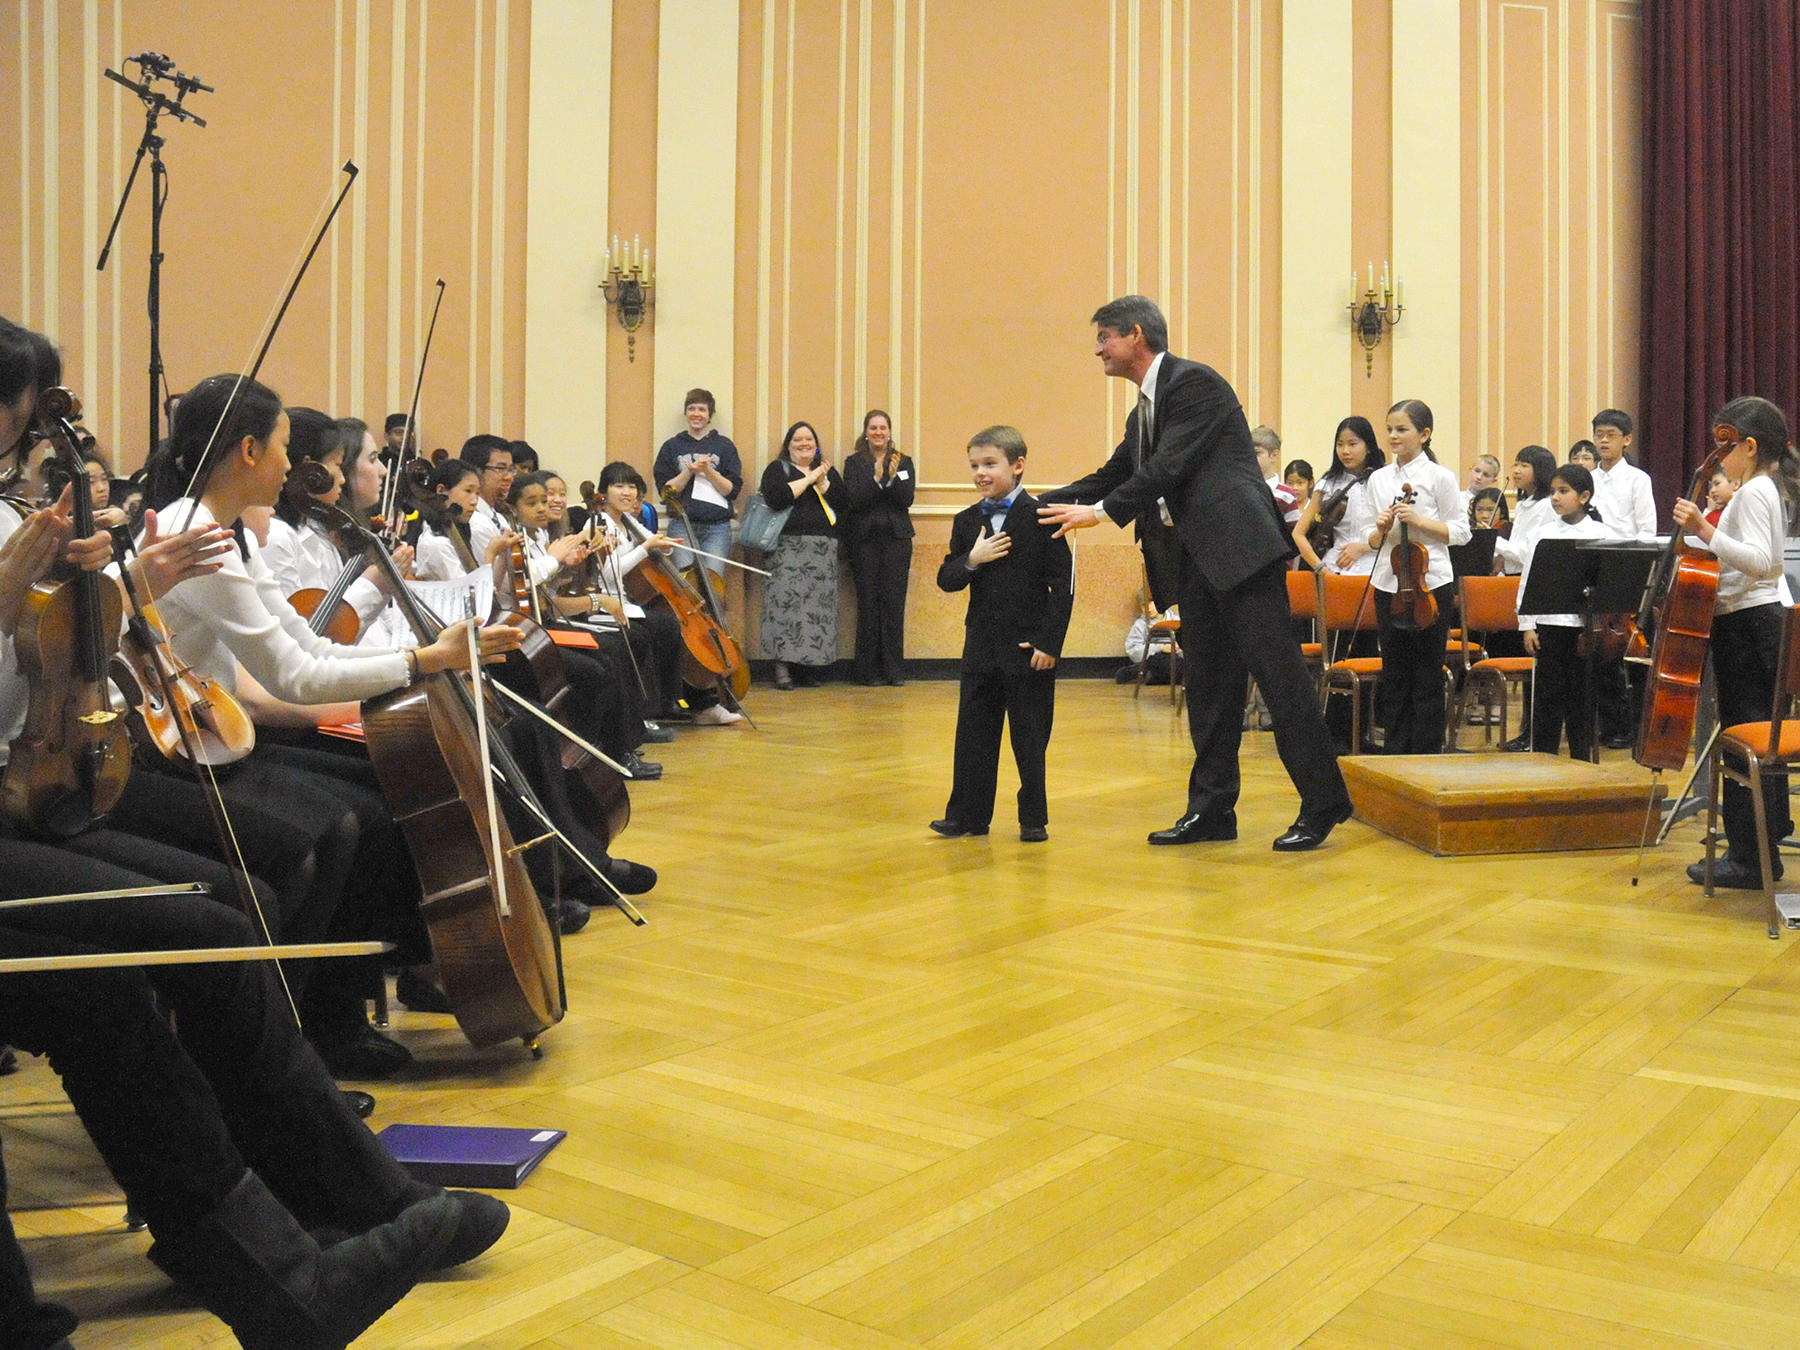 A Prep student composer takes a bow